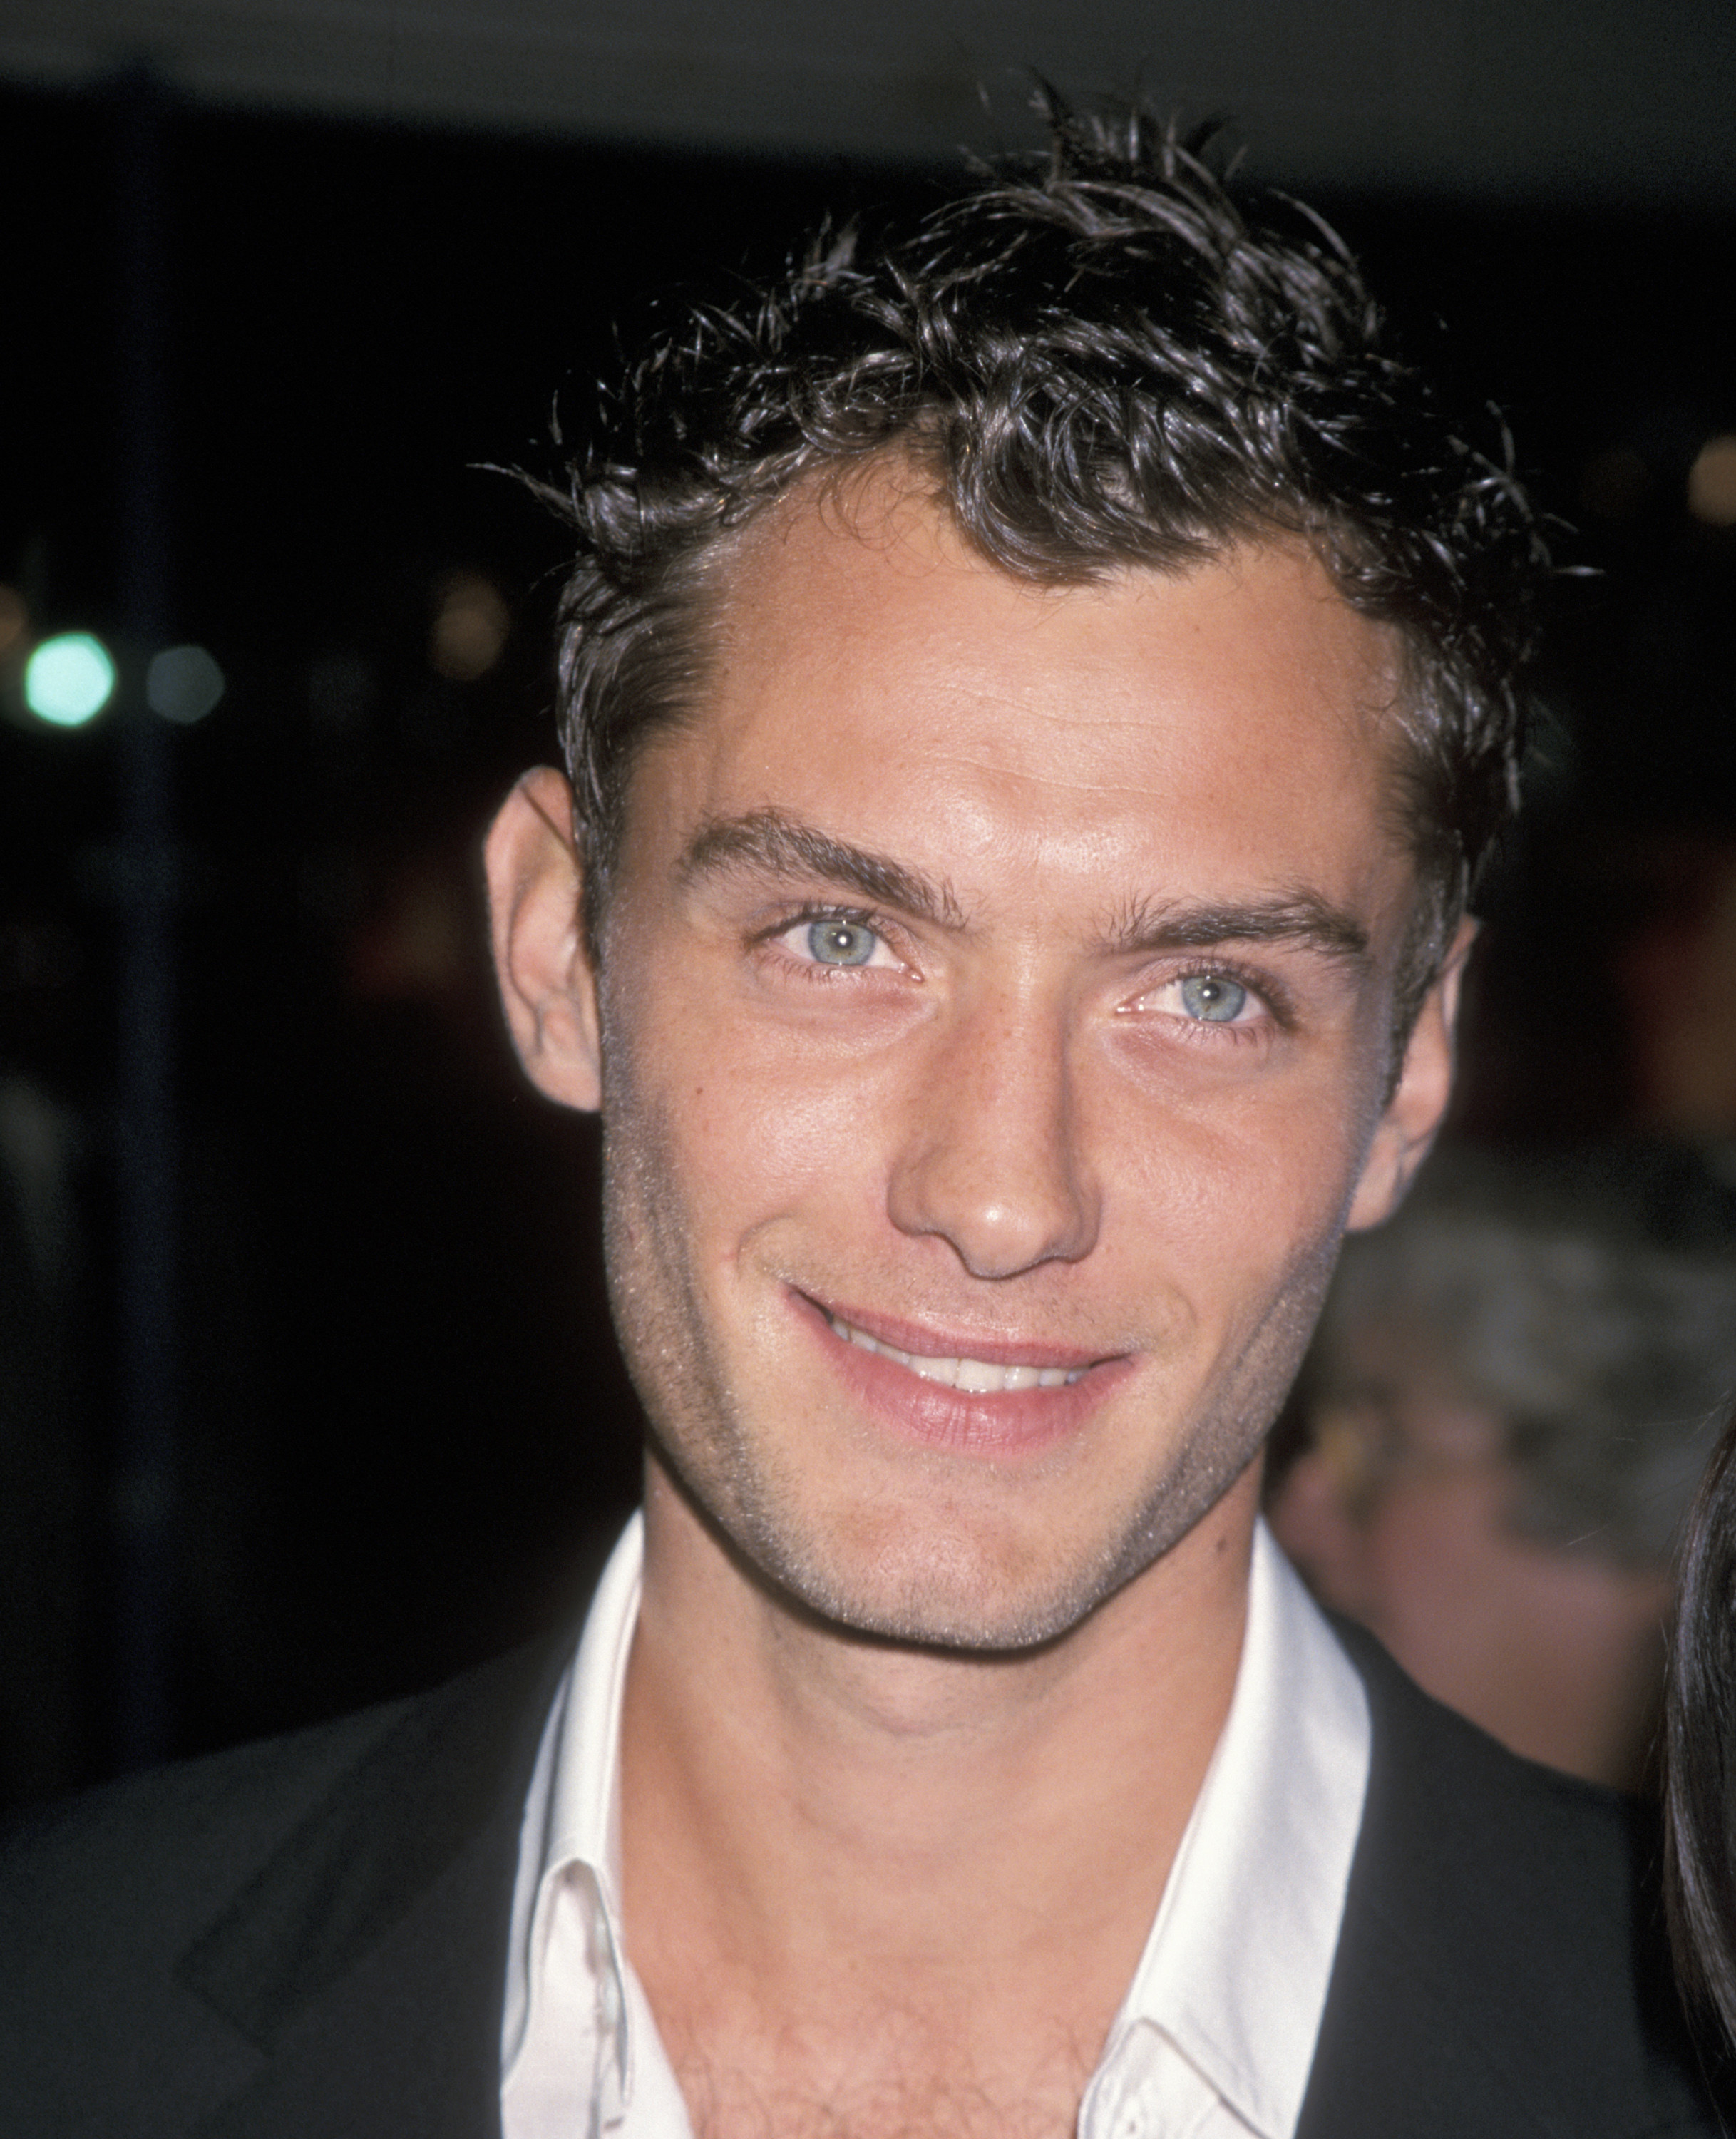 Jude Law smiling